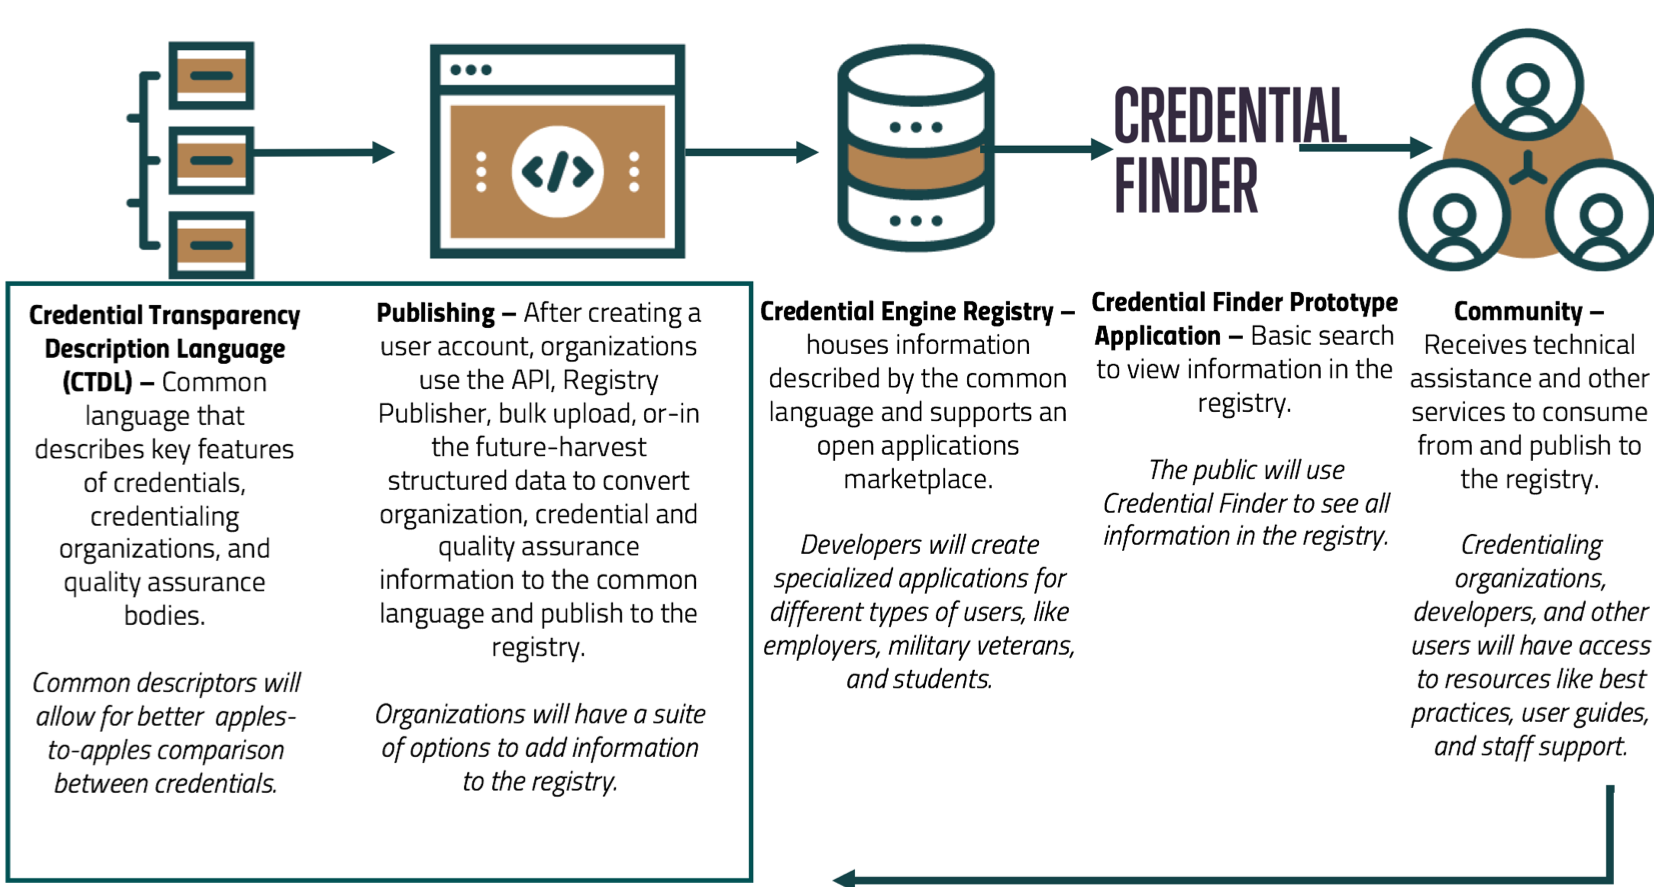 showcasing how the credential engine works (starts with common credential description language, publishing the credentials to the Credential Engine Registry, ensuring the credentials are live on the Credential Finder (a search tool), and finally developing a comunity of organizations, developers, and users who will have support and resources from credential engine staff.